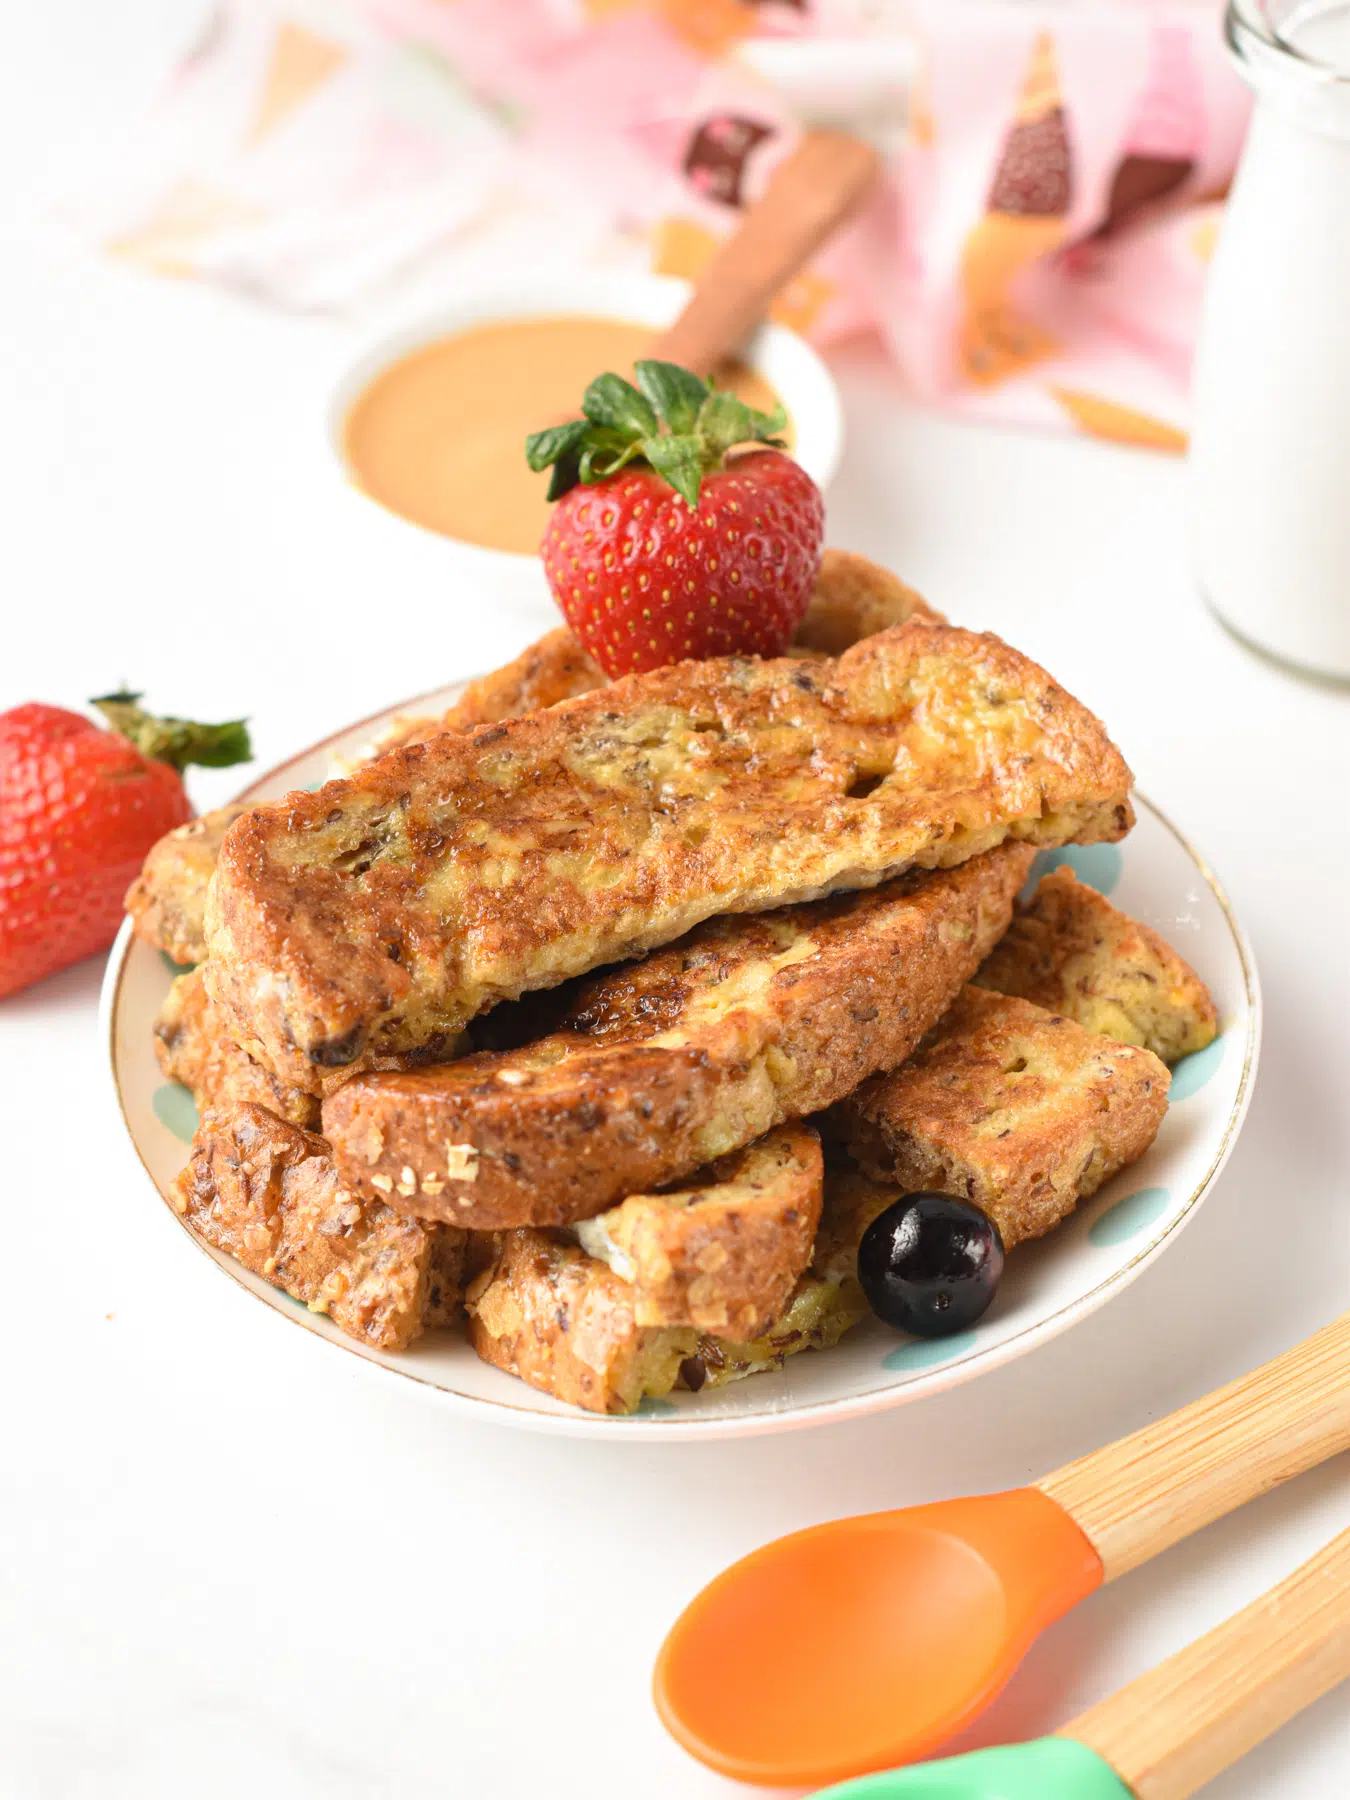 a plate filled with french toast sticks for baby led weaning